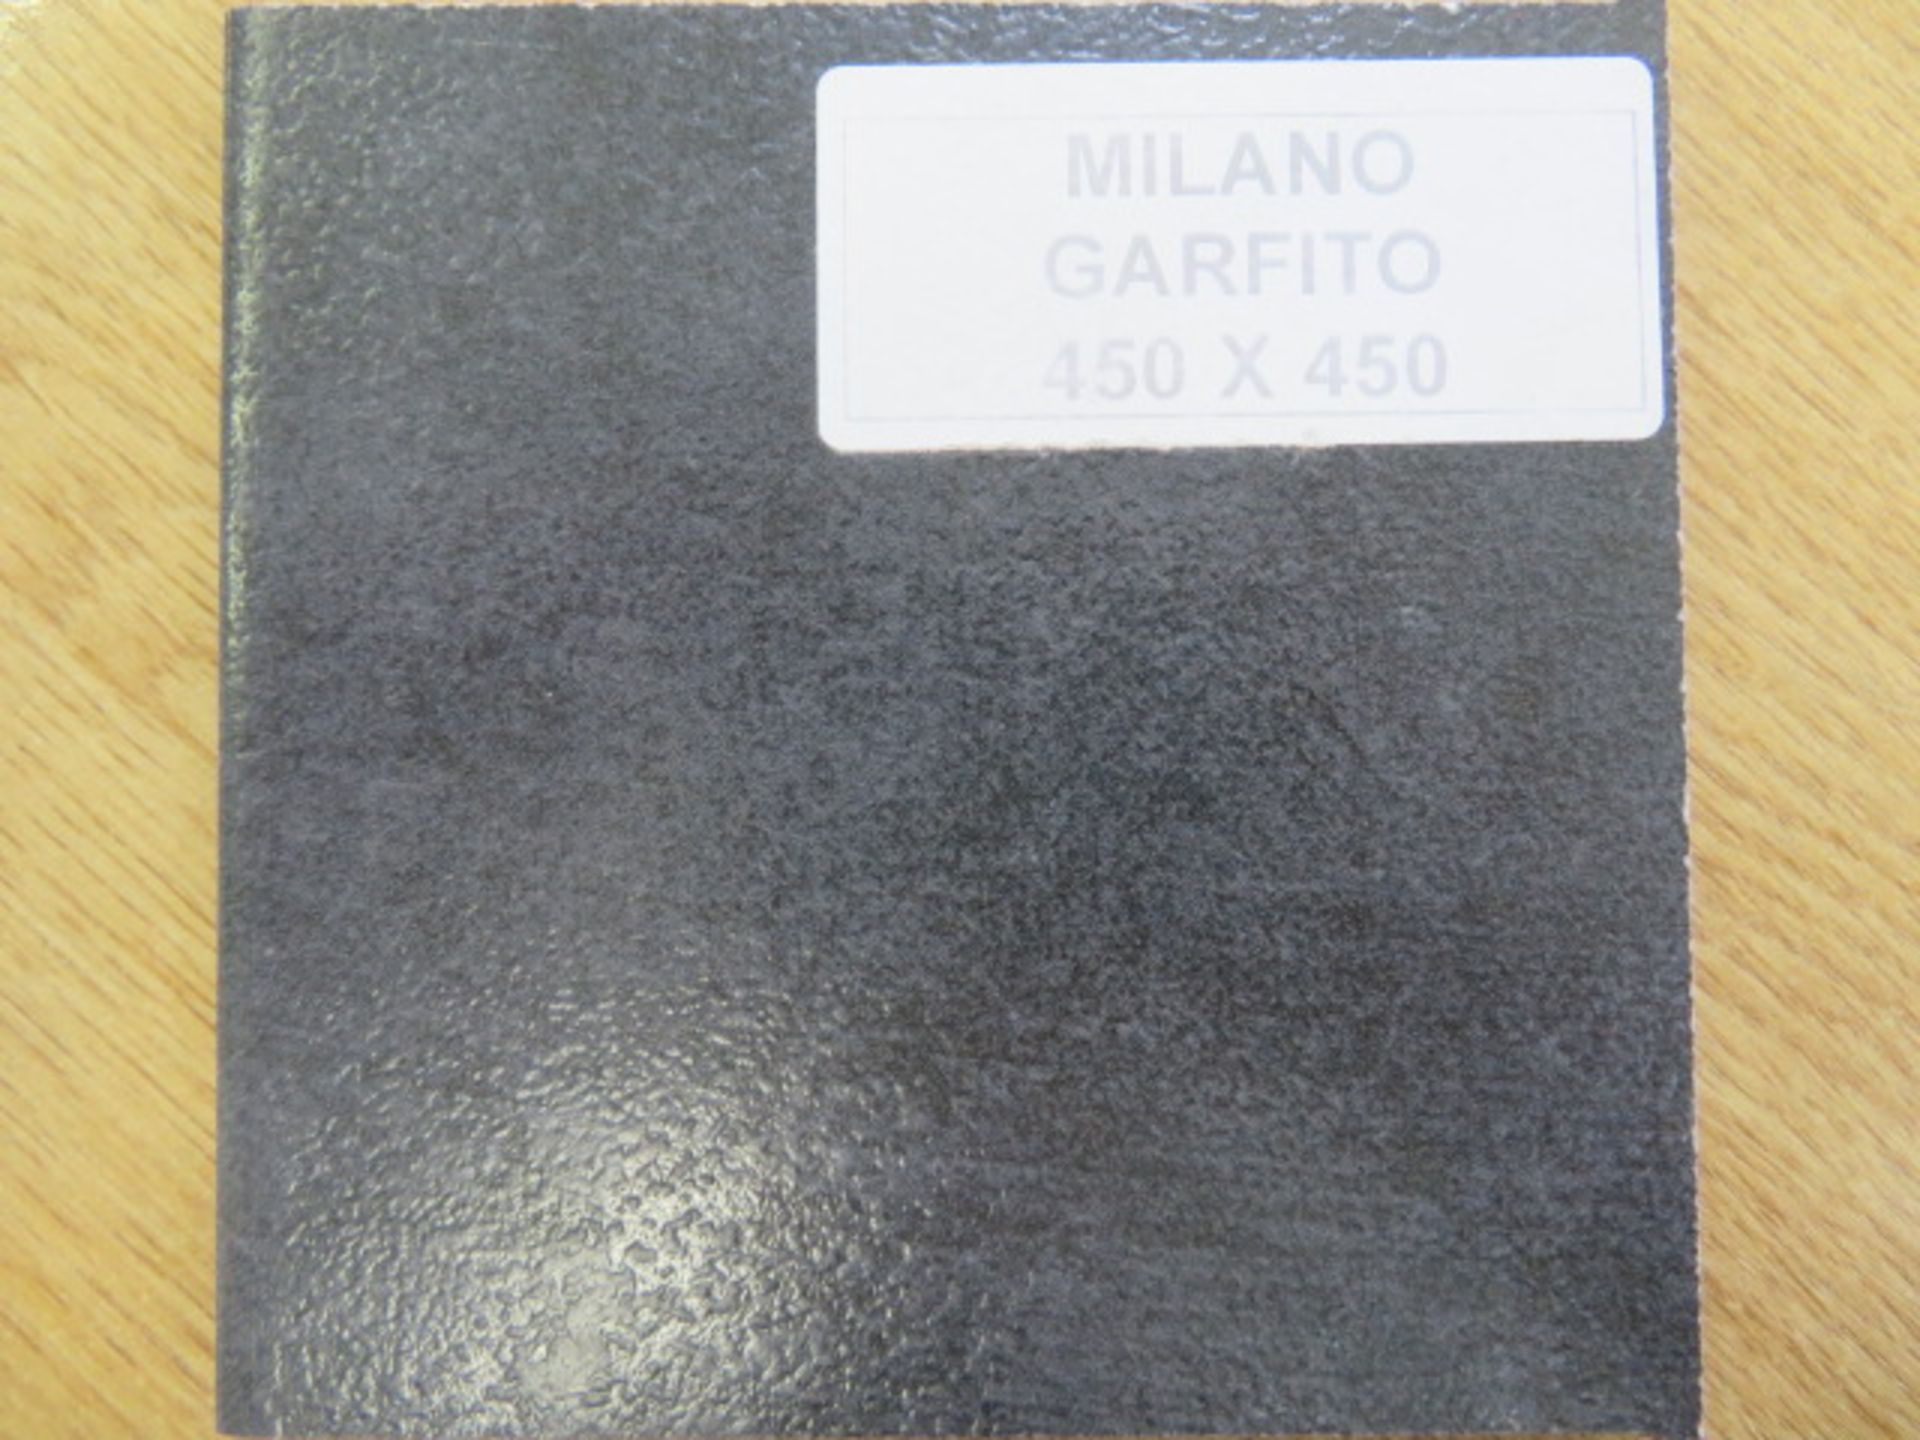 NEW 8.25m2 Milano Garfito Wall and Floor Tiles. 450x450mm per tile, 10mm Thick. Give your bat... - Image 2 of 4